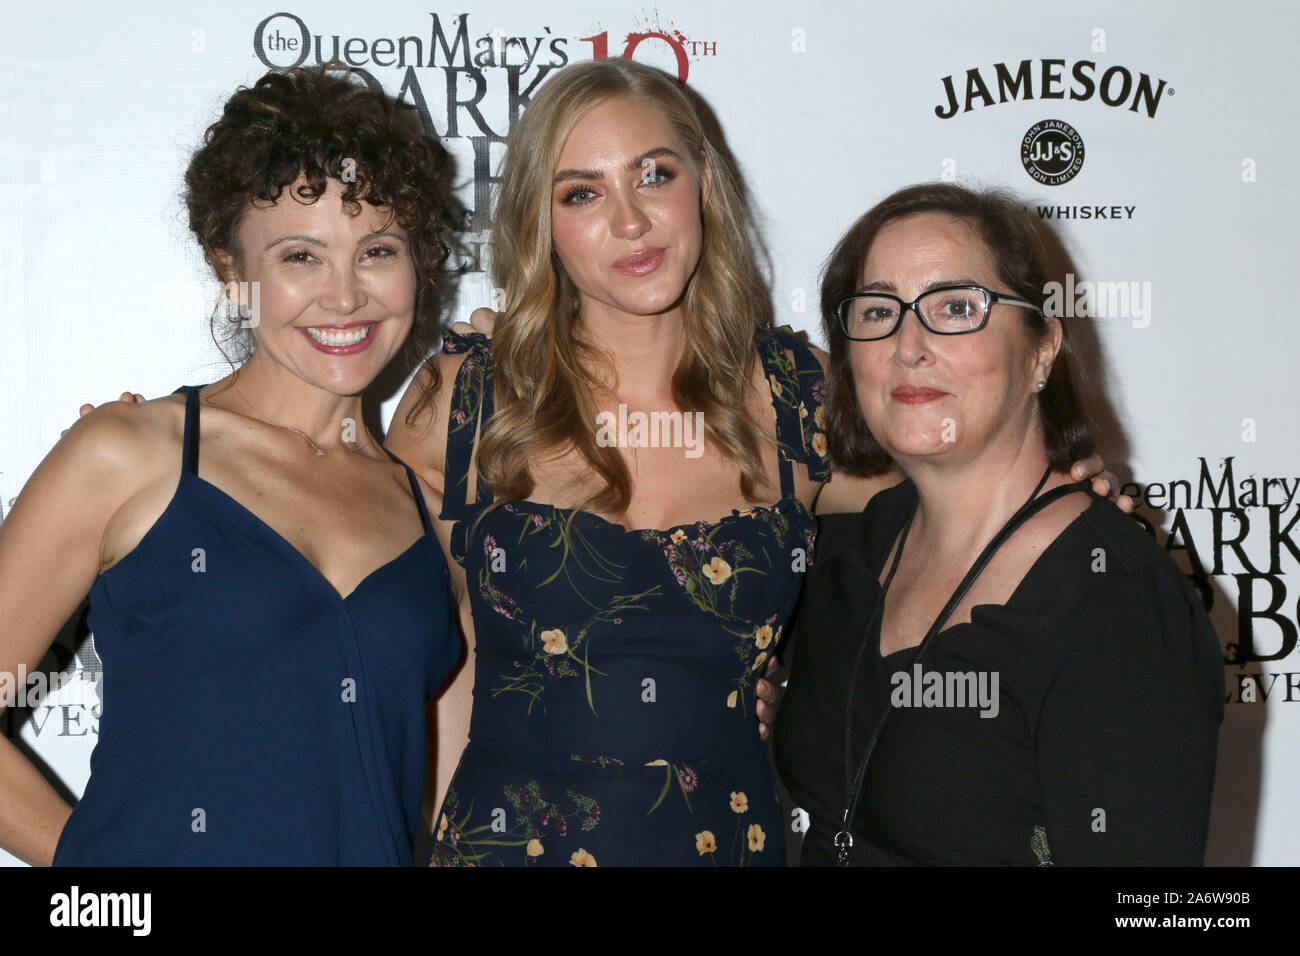 2019 Catalina Film Festival - Thursday at the Queen Mary on September 26, 2019 in Long Beach, CA Featuring: Reiko Aylesworth, Jessica Sipos, Jillian Armenante Where: Long Beach, California, United States When: 27 Sep 2019 Credit: Nicky Nelson/WENN.com Stock Photo